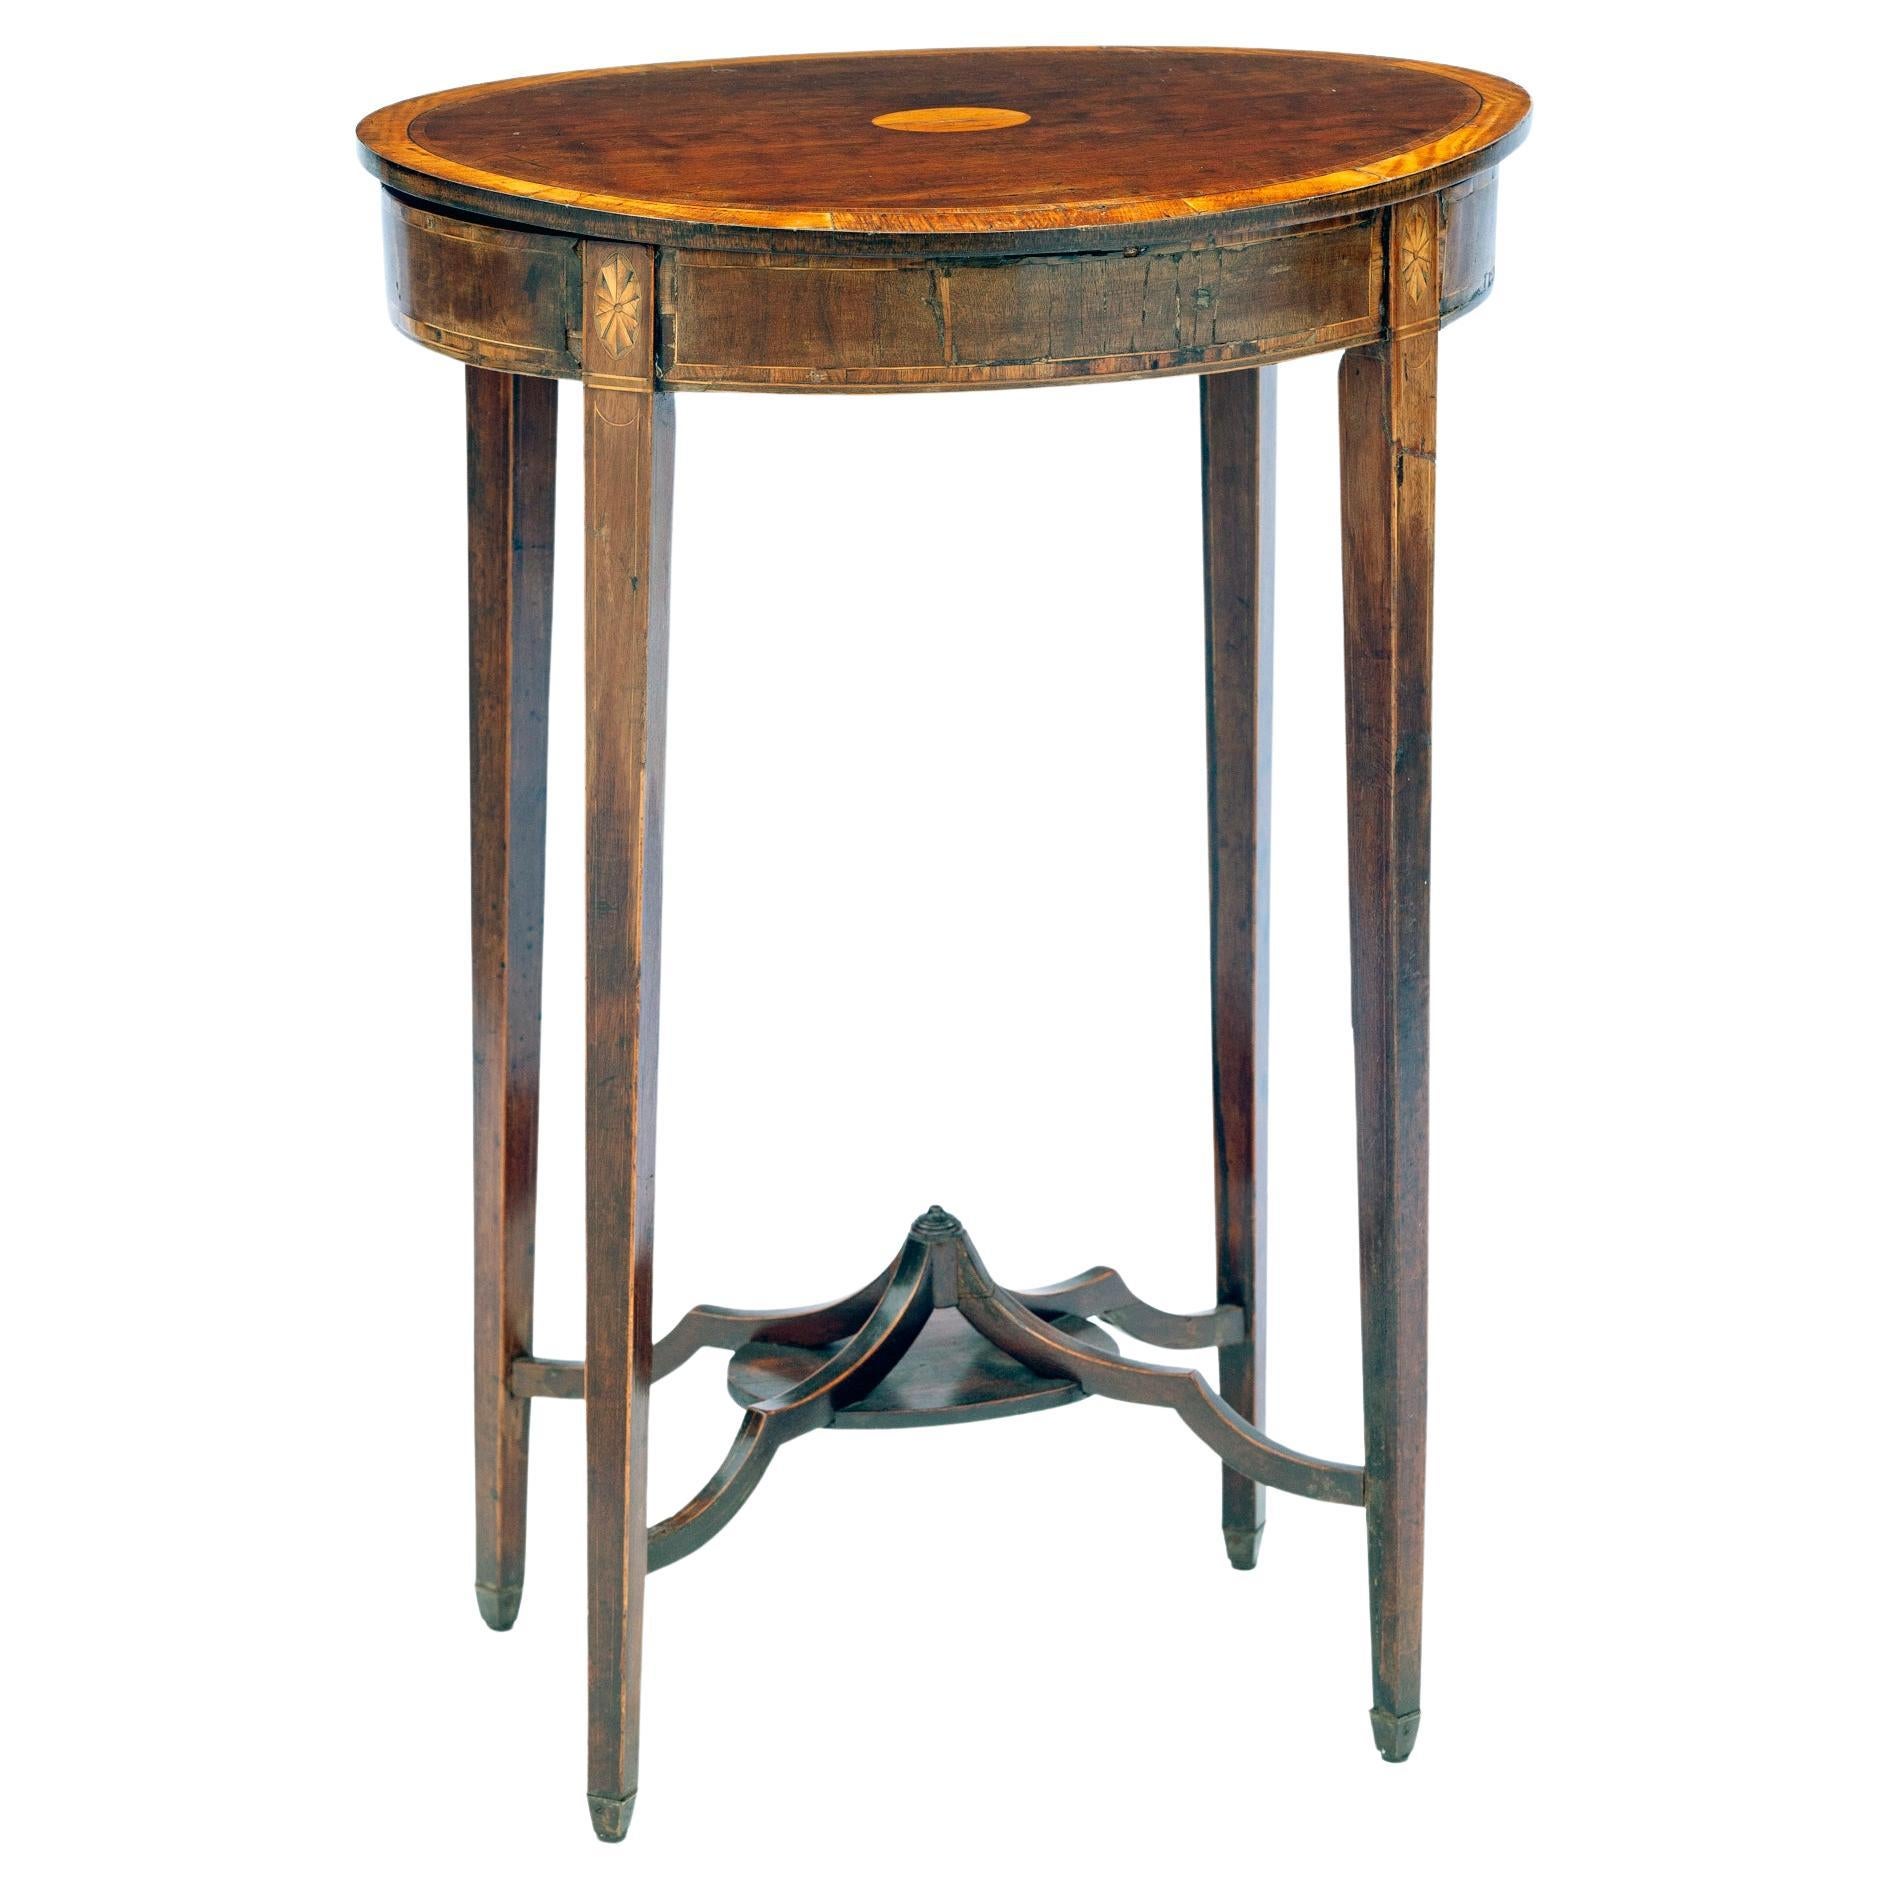 Petite Oval Occasional Table in Mahogany & Satinwood